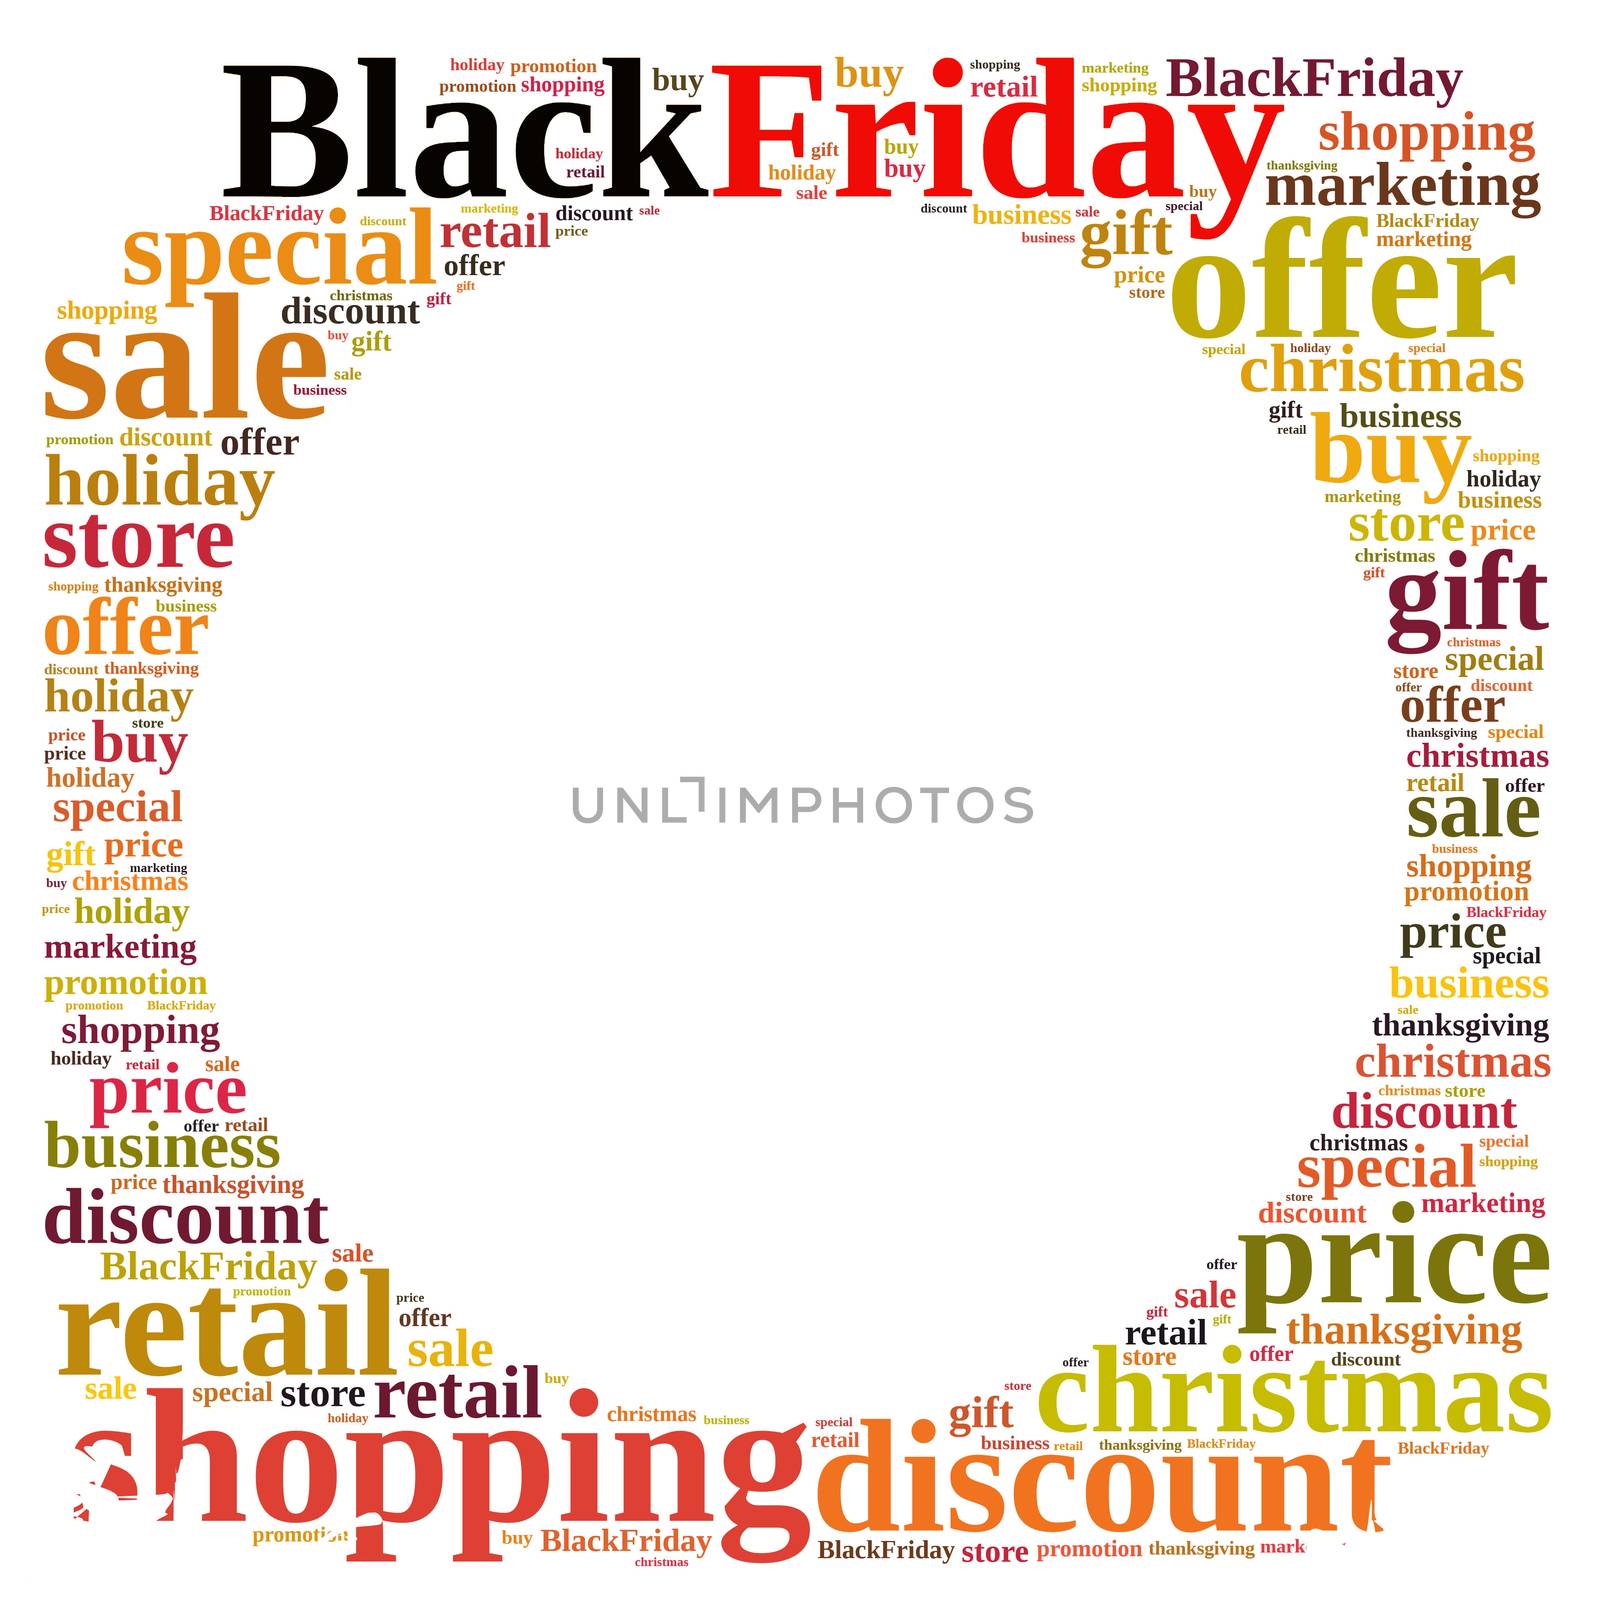 Illustration with word cloud about Black Friday.